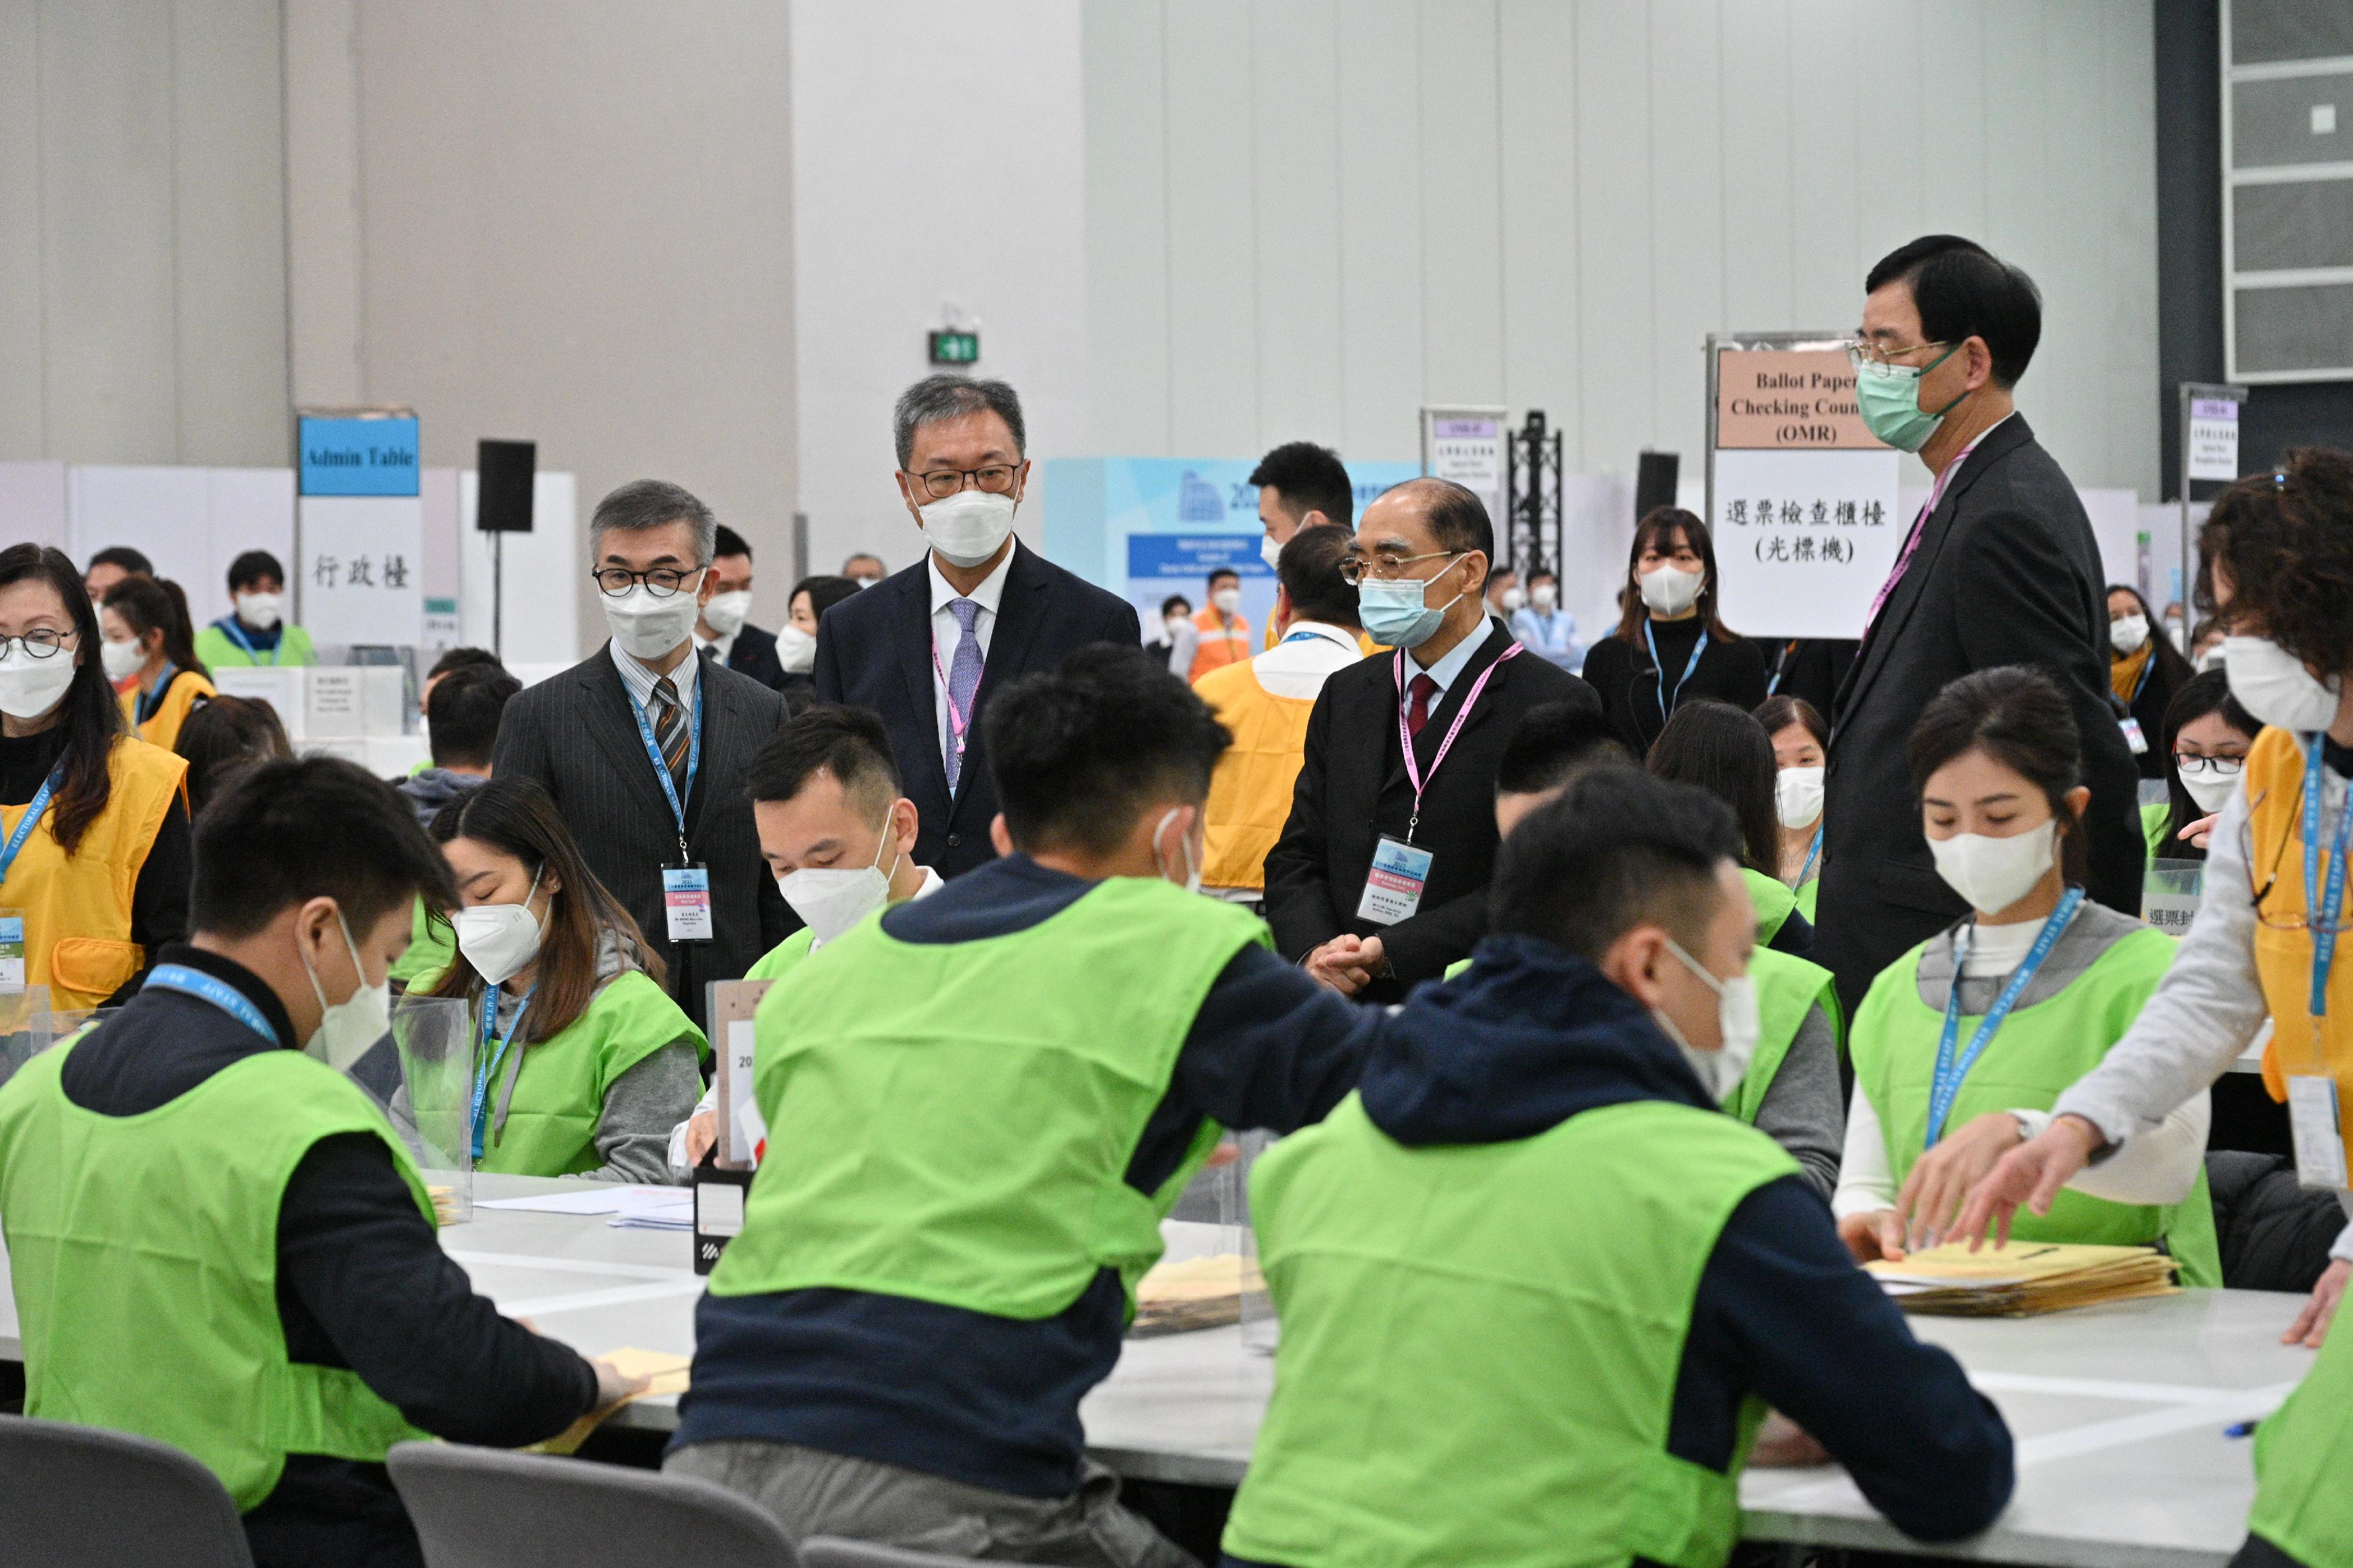 The Chairman of the Electoral Affairs Commission (EAC), Mr Justice David Lok (second left), EAC members Mr Arthur Luk, SC (second right), and Professor Daniel Shek (first right) inspected the counting process at the central counting station of the 2022 Legislative Council Election Committee constituency by-election at the Hong Kong Convention and Exhibition Centre today (December 18). Also present was the Chief Electoral Officer of the Registration and Electoral Office, Mr Raymond Wang (first left).